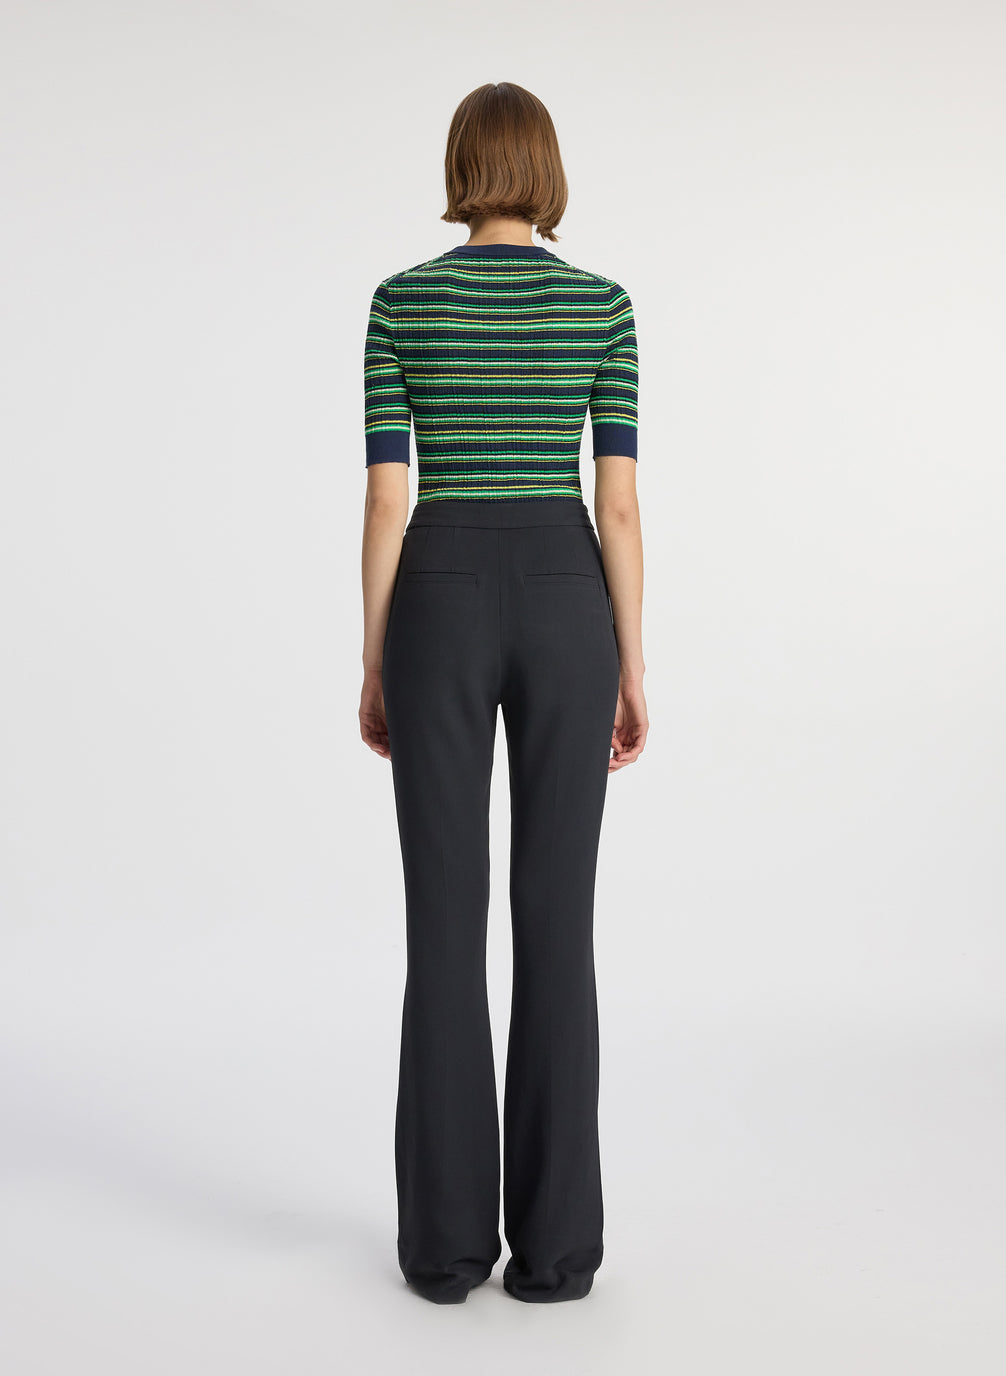 back  view of woman wearing navy blue and green striped half sleeve button placket shirt and black pant